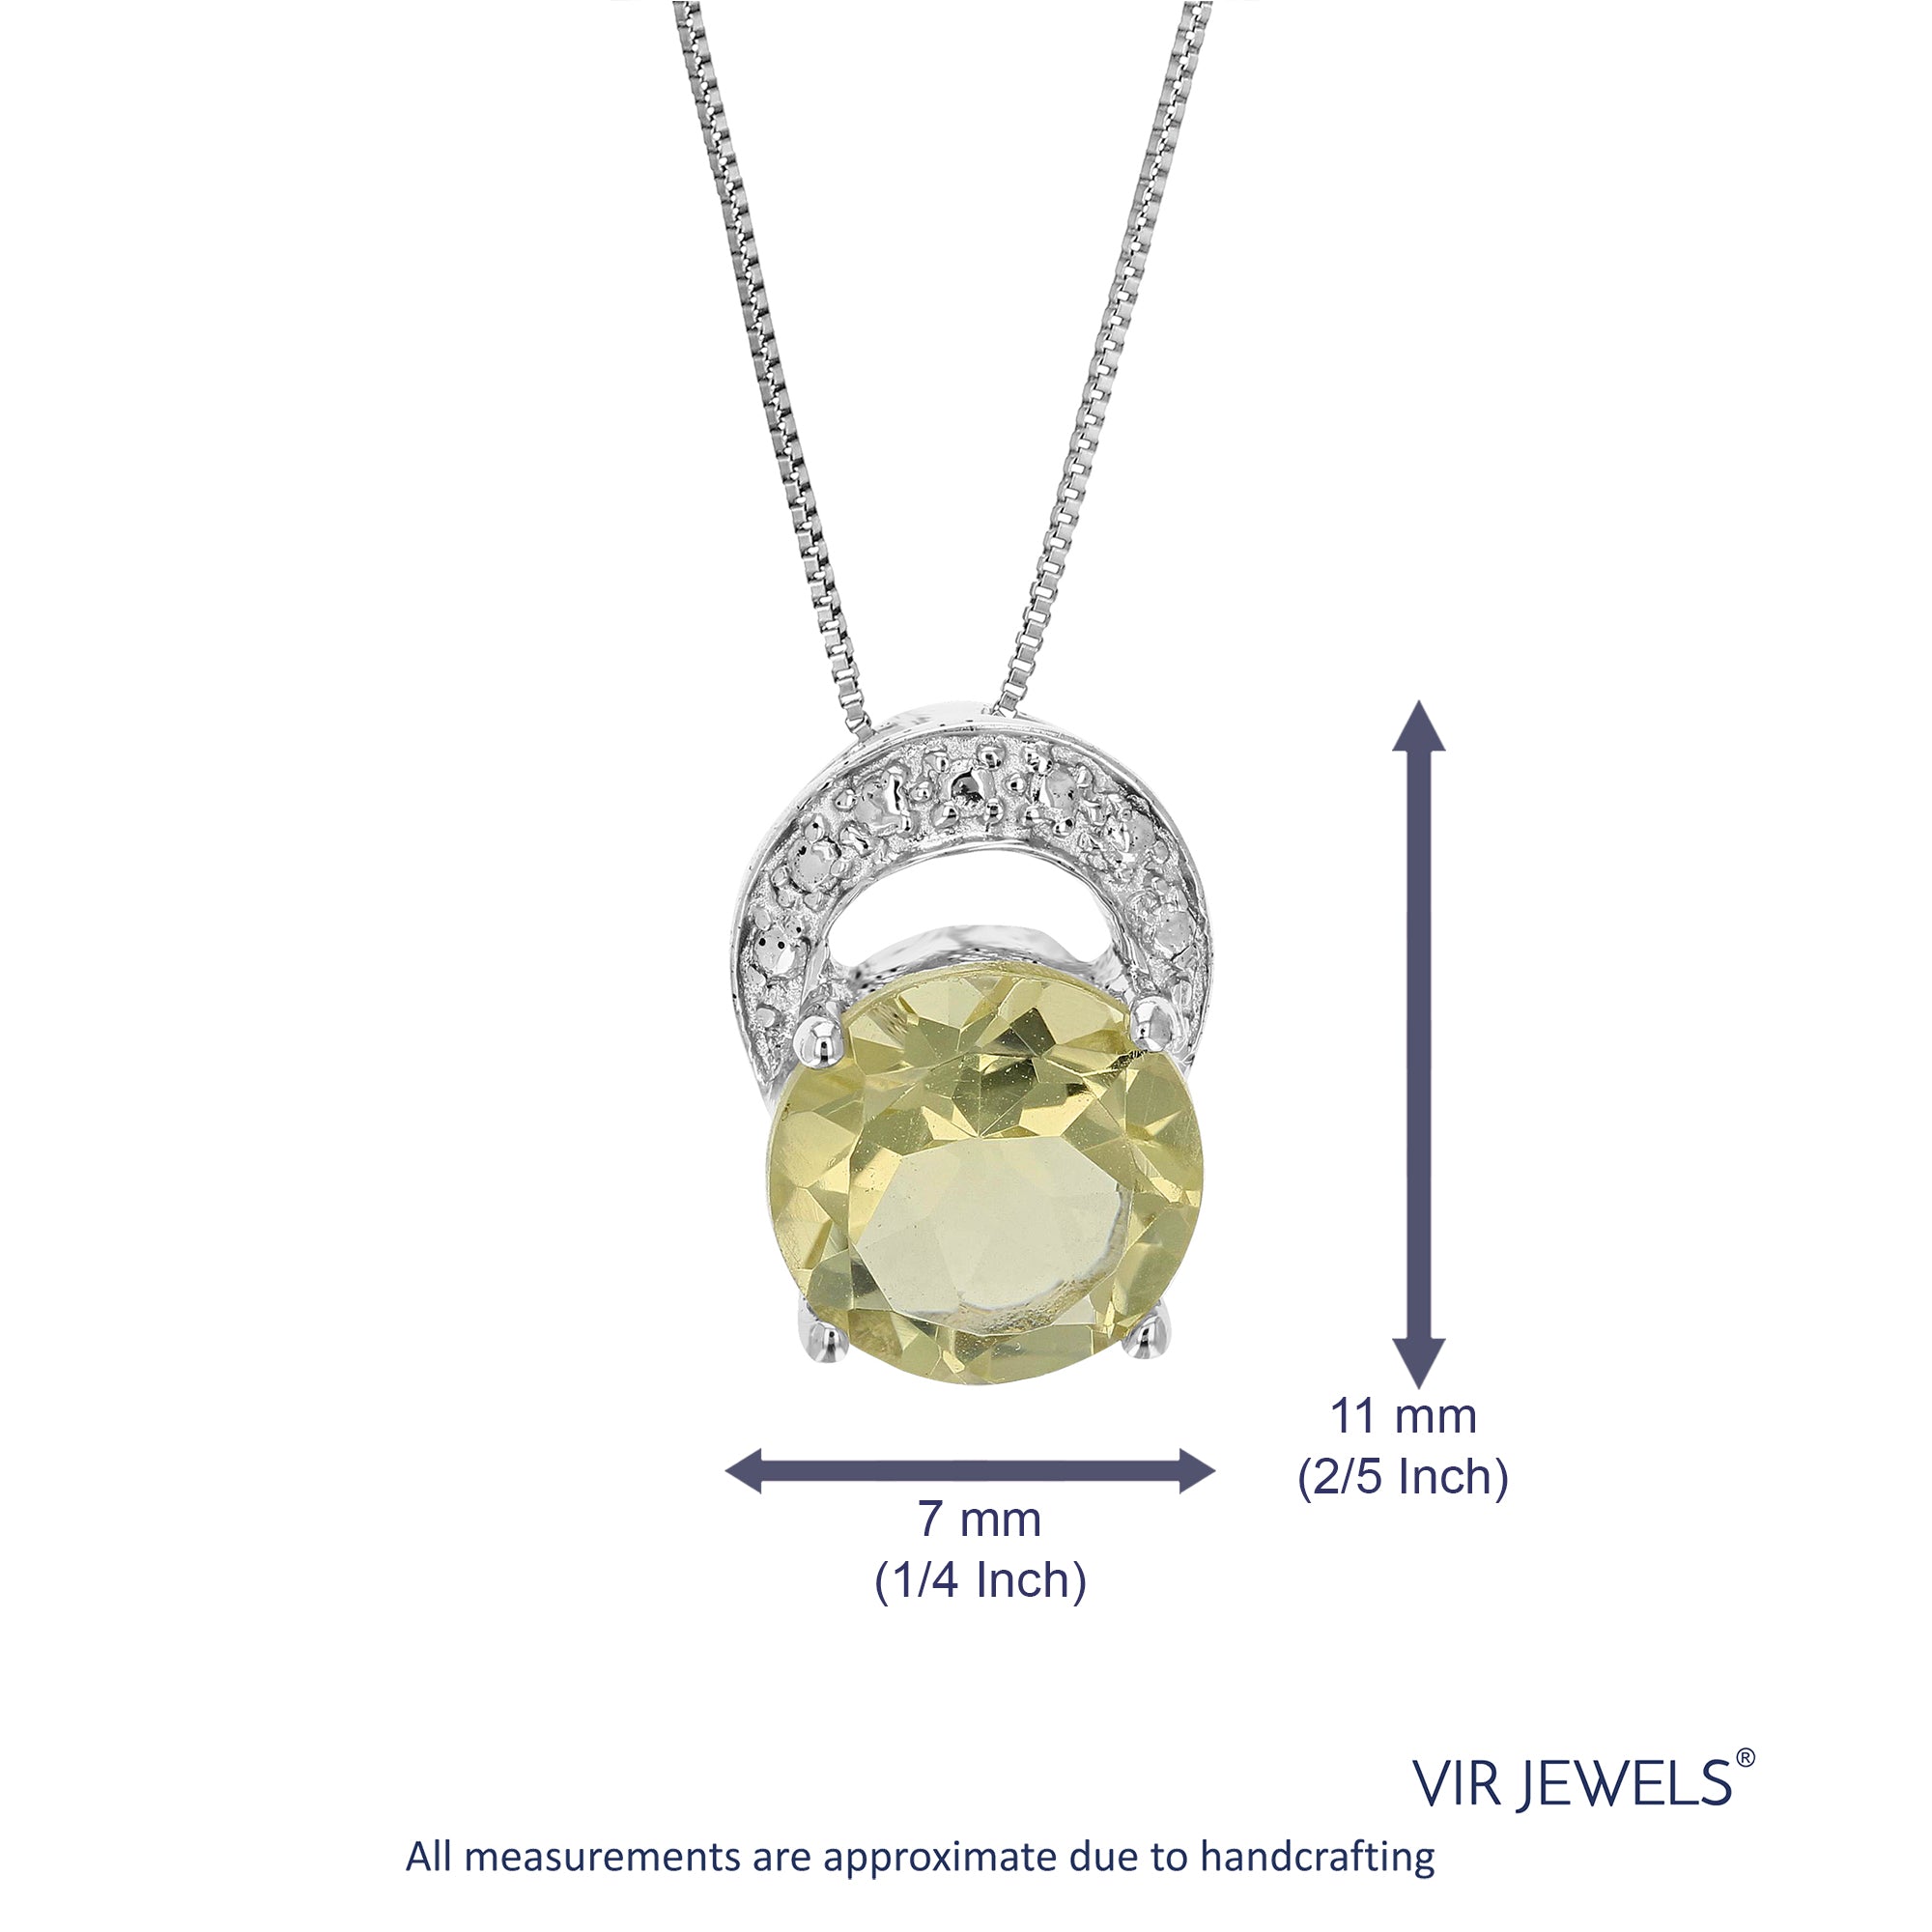 1.50 cttw Pendant Necklace, Lemon Quartz Pendant Necklace for Women in .925 Sterling Silver with Rhodium, 18 Inch Chain, Prong Setting